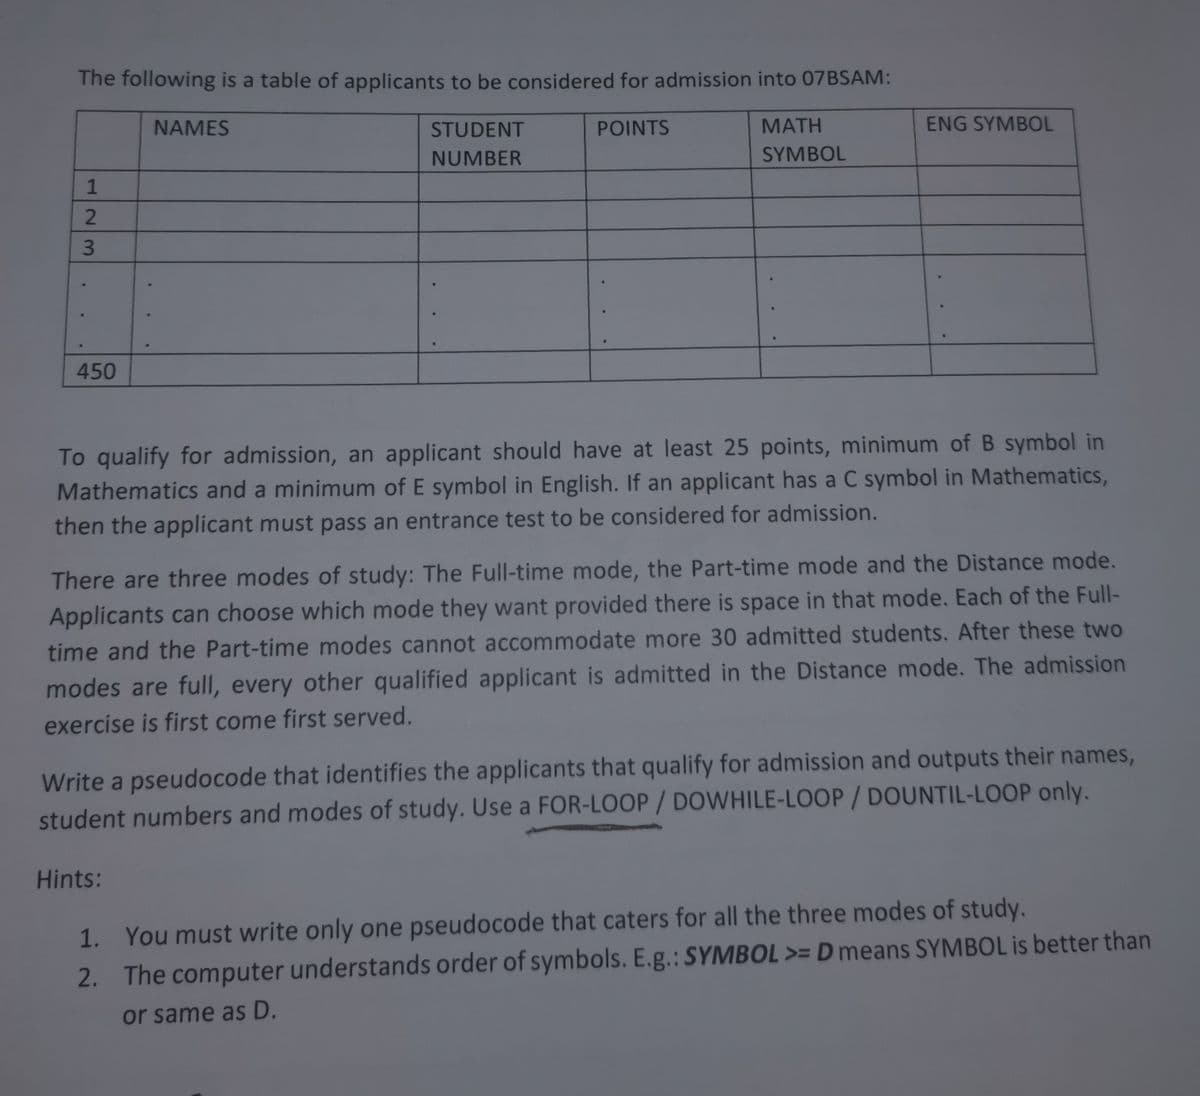 The following is a table of applicants to be considered for admission into 07BSAM:
POINTS
MATH
SYMBOL
.
123
450
NAMES
STUDENT
NUMBER
ENG SYMBOL
To qualify for admission, an applicant should have at least 25 points, minimum of B symbol in
Mathematics and a minimum of E symbol in English. If an applicant has a C symbol in Mathematics,
then the applicant must pass an entrance test to be considered for admission.
Hints:
There are three modes of study: The Full-time mode, the Part-time mode and the Distance mode.
Applicants can choose which mode they want provided there is space in that mode. Each of the Full-
time and the Part-time modes cannot accommodate more 30 admitted students. After these two
modes are full, every other qualified applicant is admitted in the Distance mode. The admission
exercise is first come first served.
Write a pseudocode that identifies the applicants that qualify for admission and outputs their names,
student numbers and modes of study. Use a FOR-LOOP / DOWHILE-LOOP/DOUNTIL-LOOP only.
1. You must write only one pseudocode that caters for all the three modes of study.
2. The computer understands order of symbols. E.g.: SYMBOL >= D means SYMBOL is better than
or same as D.